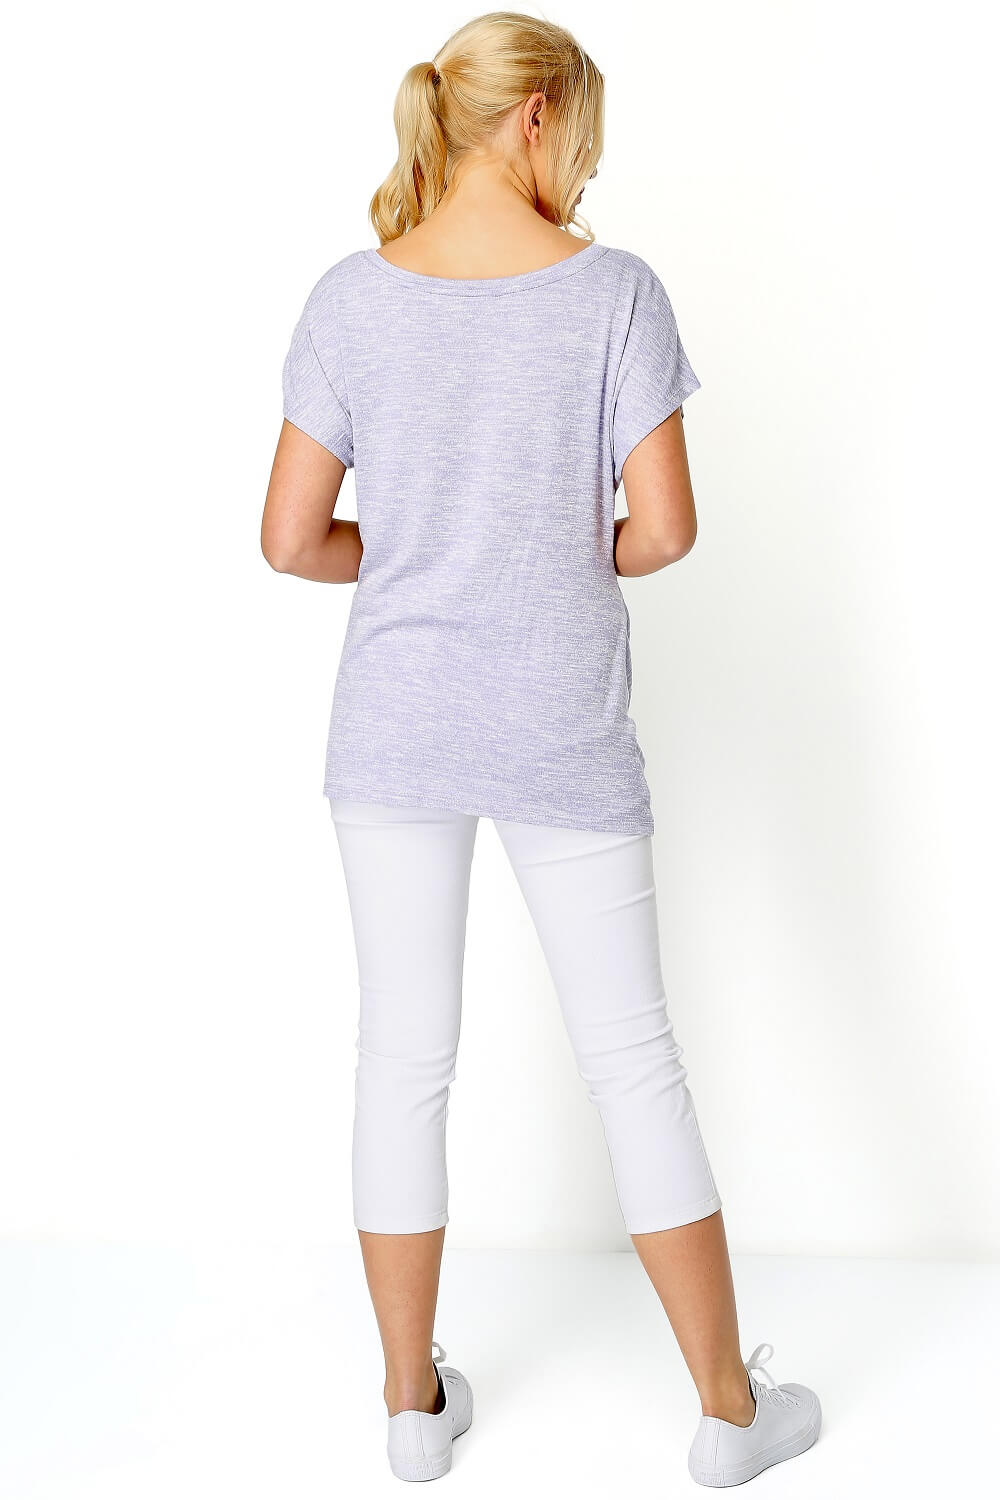 Lilac Knot Front Short Sleeve Top, Image 3 of 8